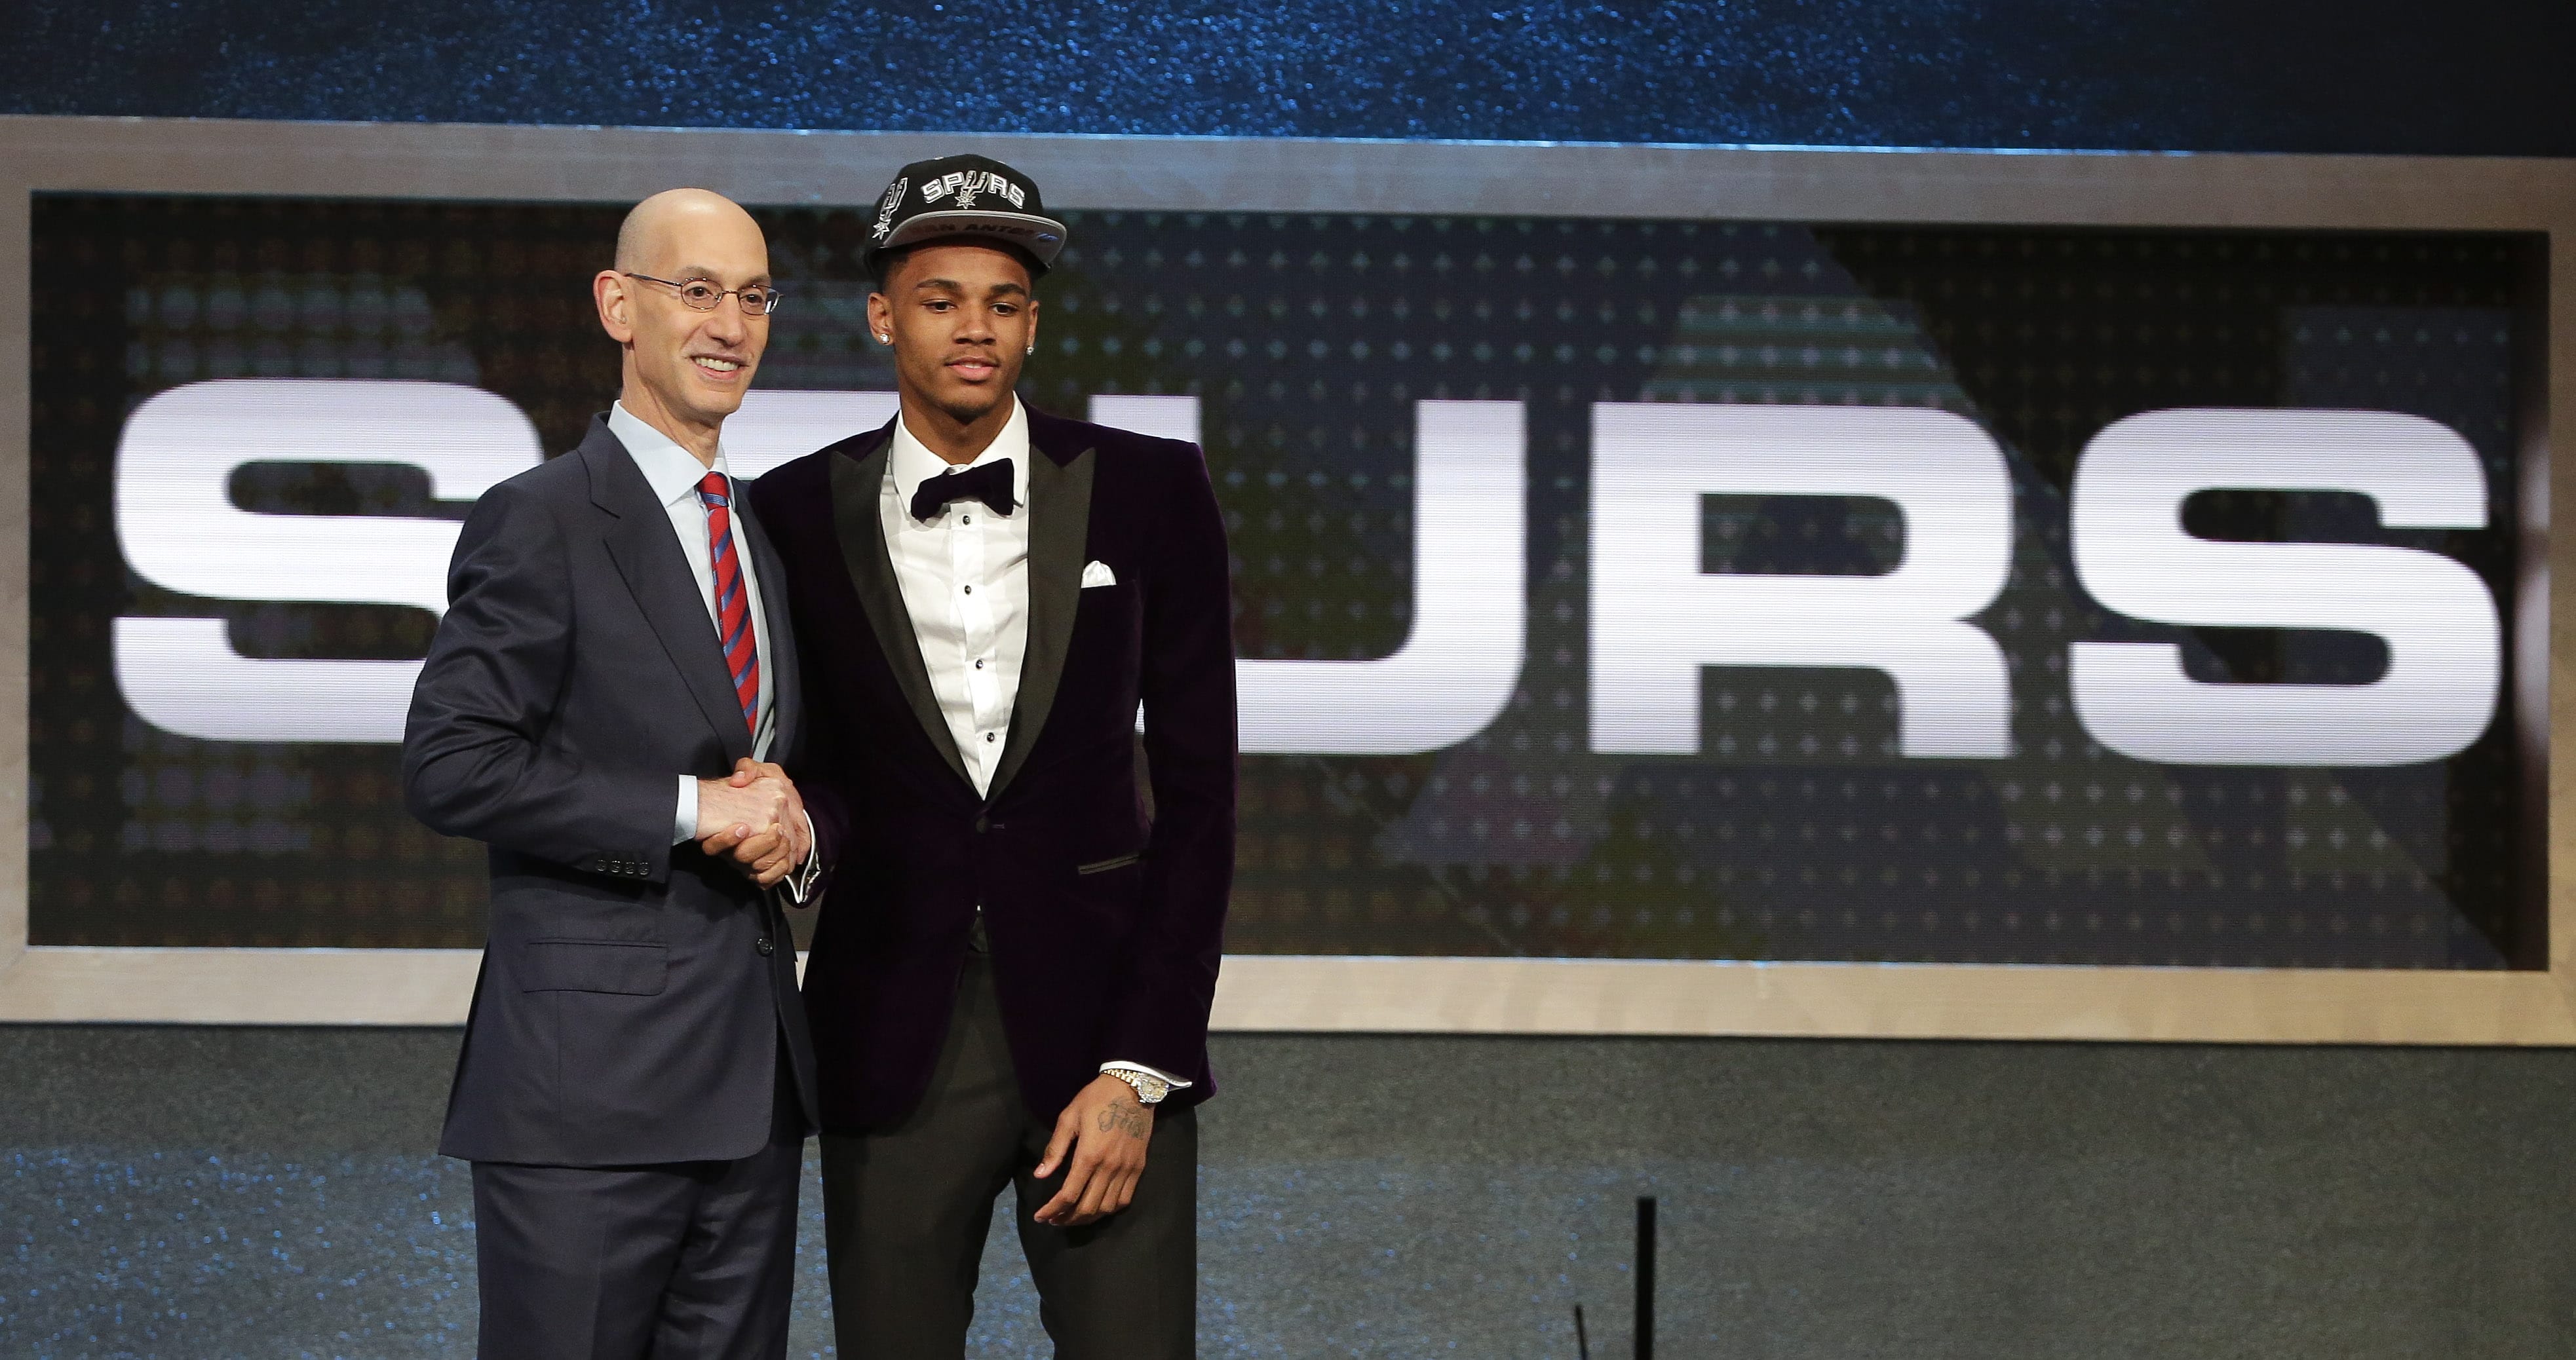 Dejounte Murray poses for a photo with NBA Commissioner Adam Silver after being selected 29th overall by the San Antonio Spurs during the NBA basketball draft, Thursday, June 23, 2016, in New York.